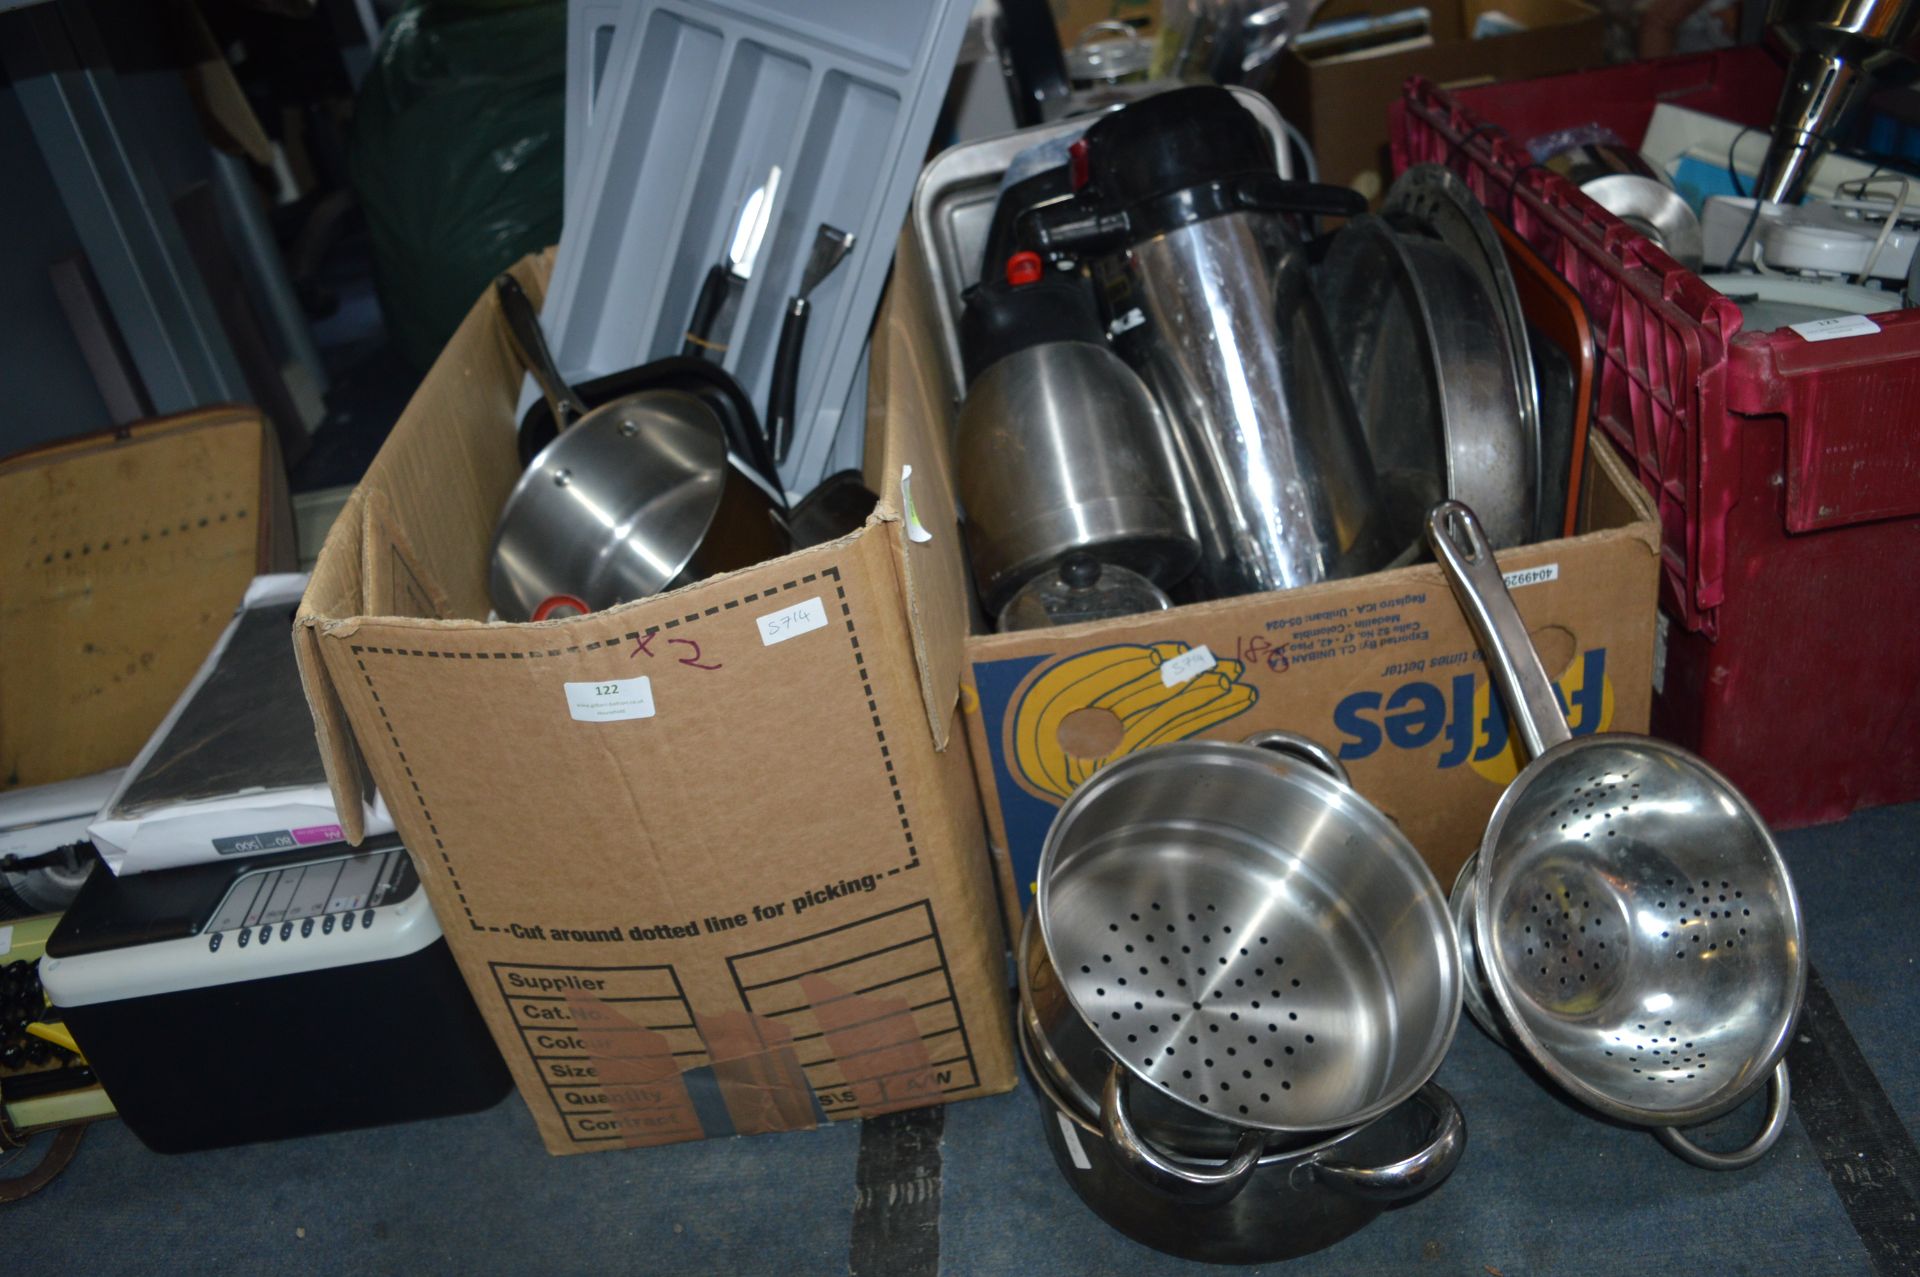 Two Boxes of Stainless Steel Kitchenware